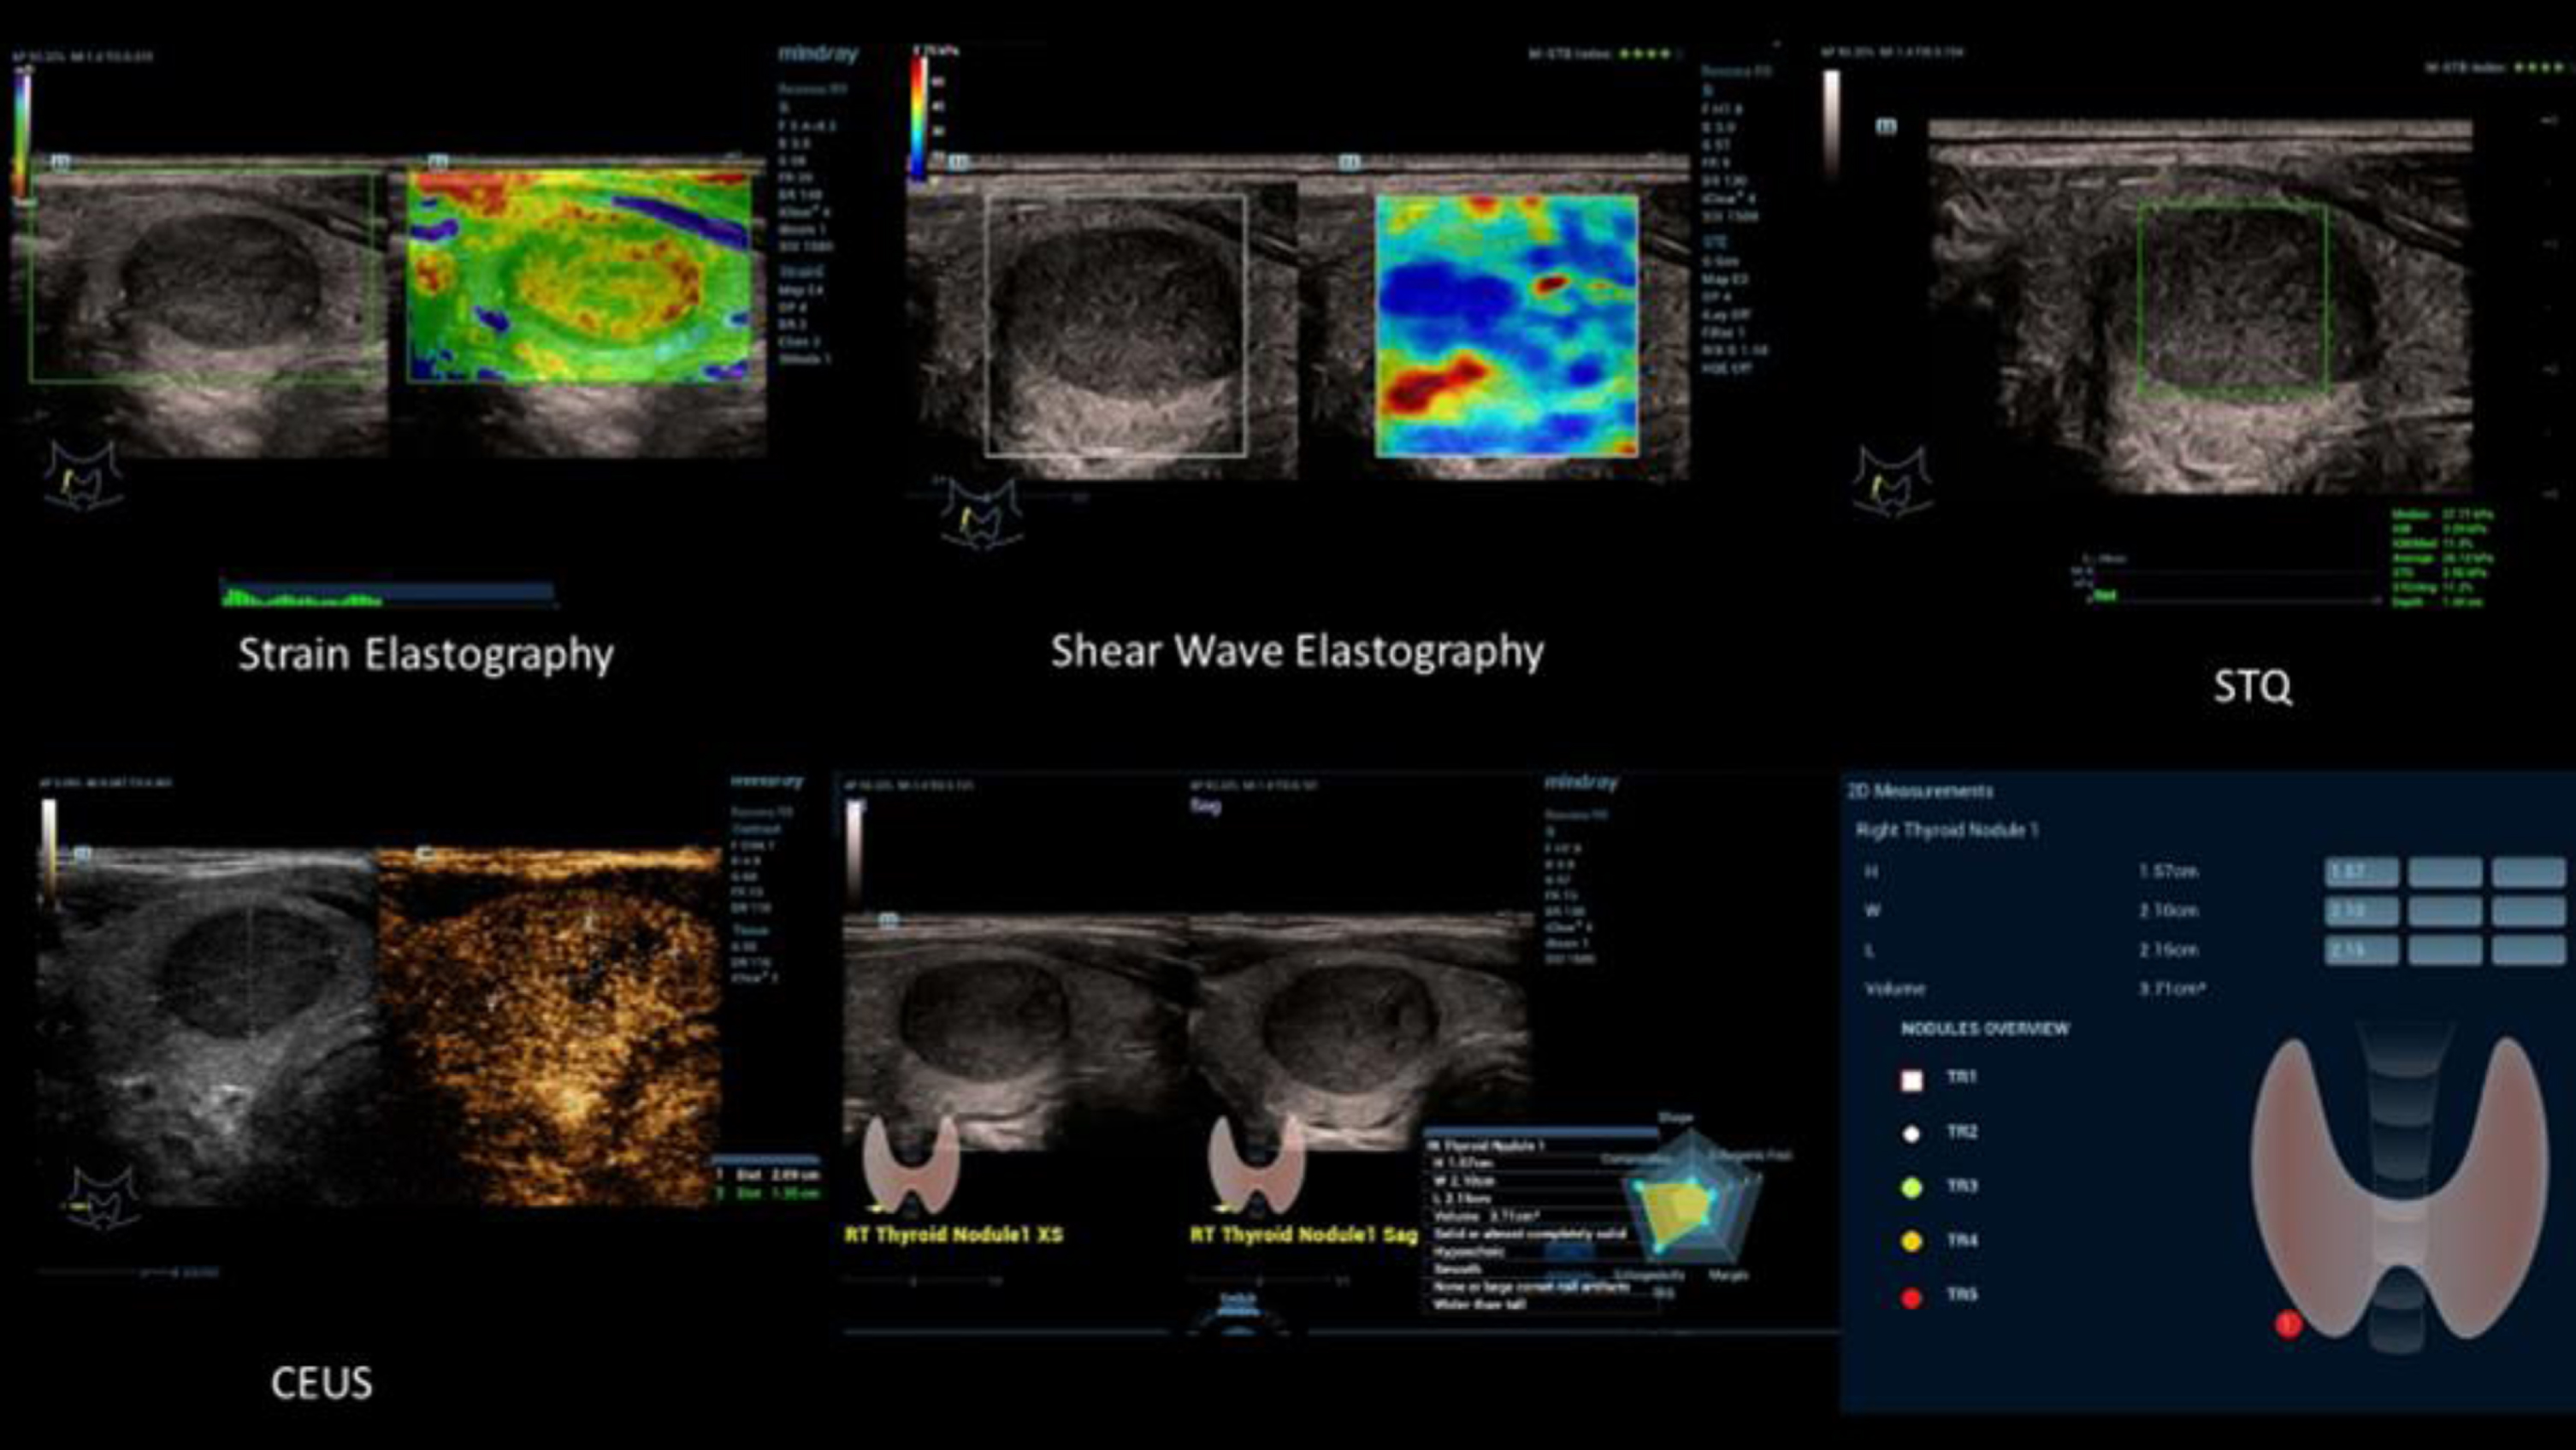 Multimodality ultrasound diagnosis of medullary thyroid carcinoma (TI-RADS V) with inhomogeneous compaction in strain and shear wave elastography (top left), with irregular micro-vascularization with CEUS (top right, bottom left) and documentation and evaluation with AI tools bottom right.